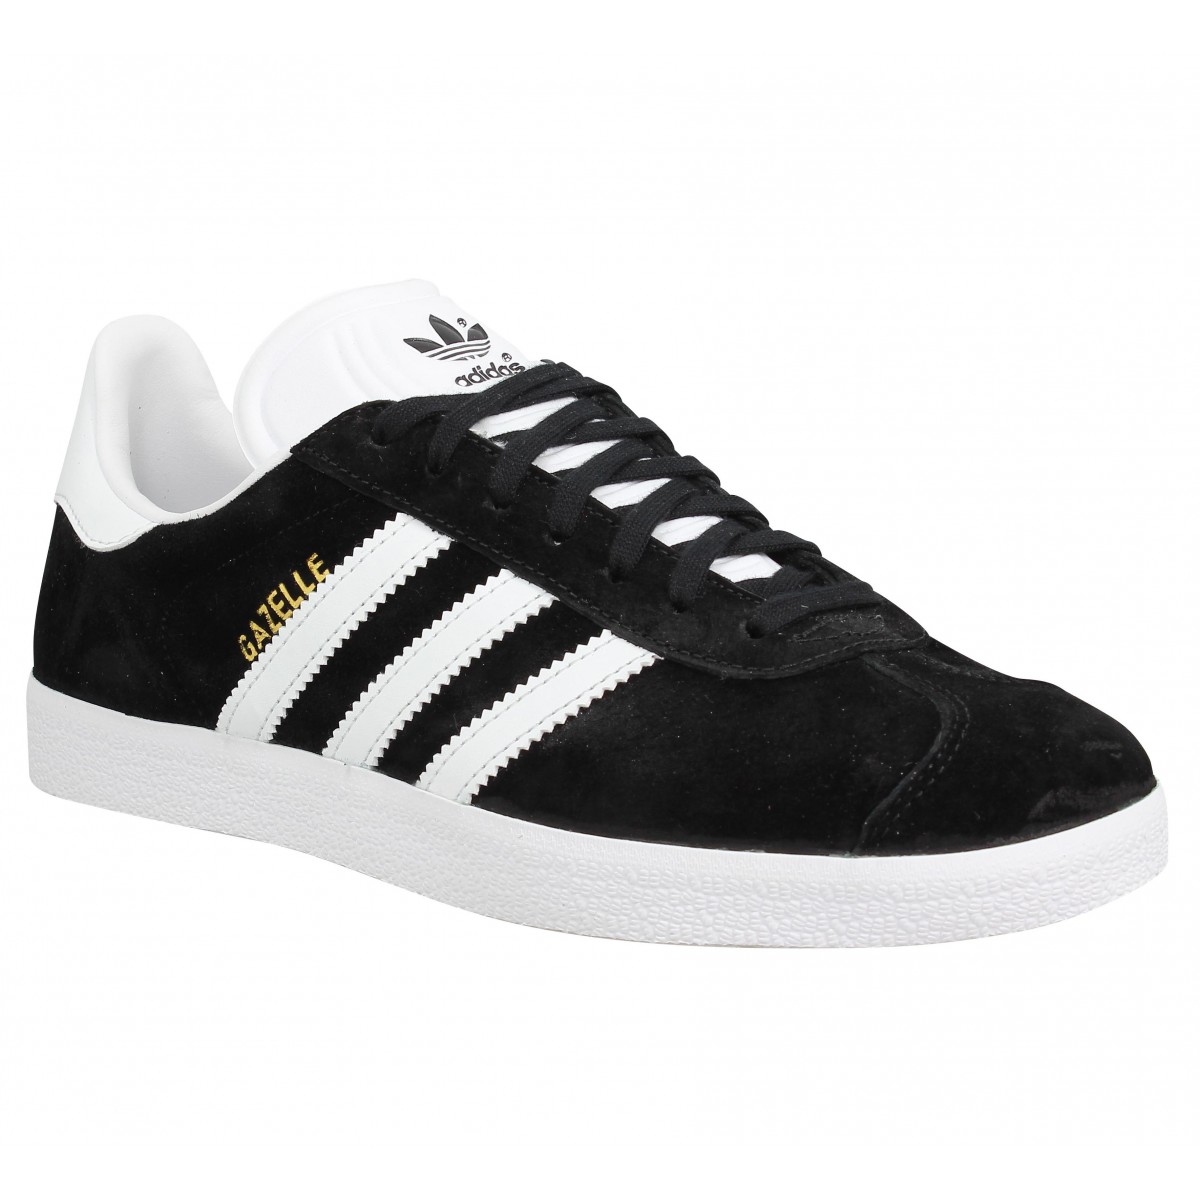 buy > adidas femme noir et blanche, Up to 67% OFF